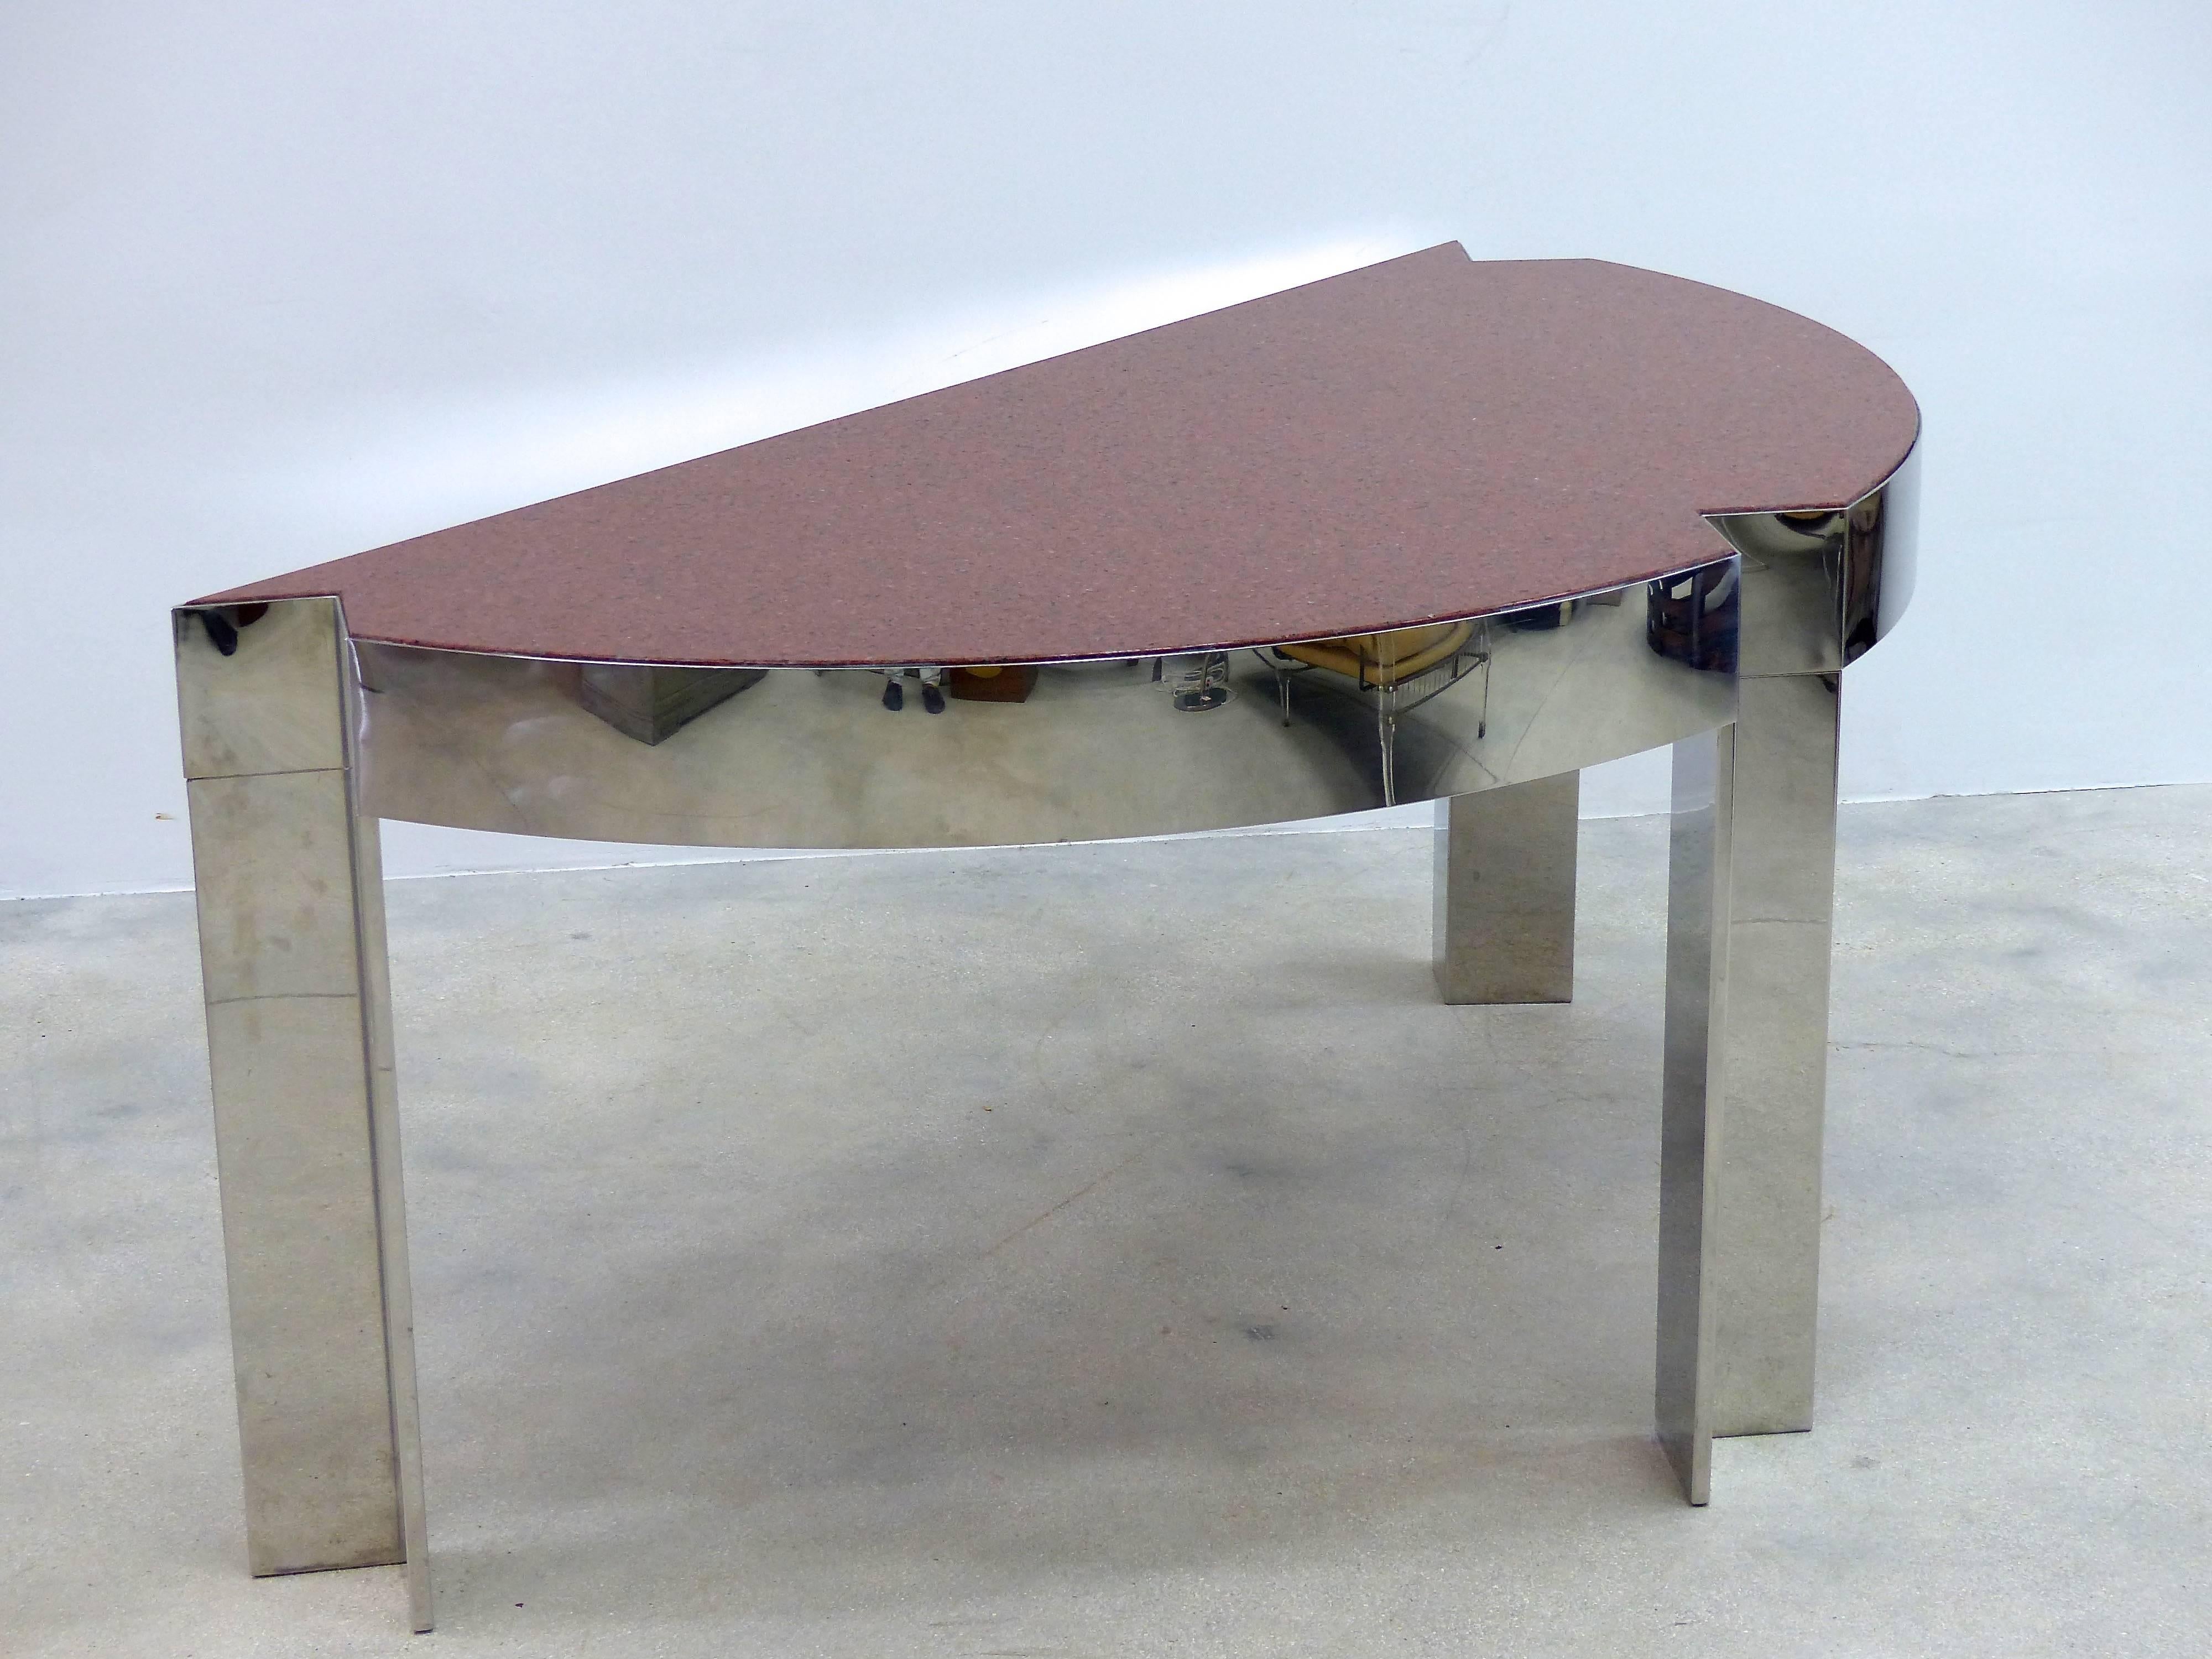 A 1970s highly-polished demilune chrome frame desk with an inset granite top surface designed by Leon Rosen for Pace collection. The three legs are inverted 90 degree angles. Two slender drawers are included on the back.